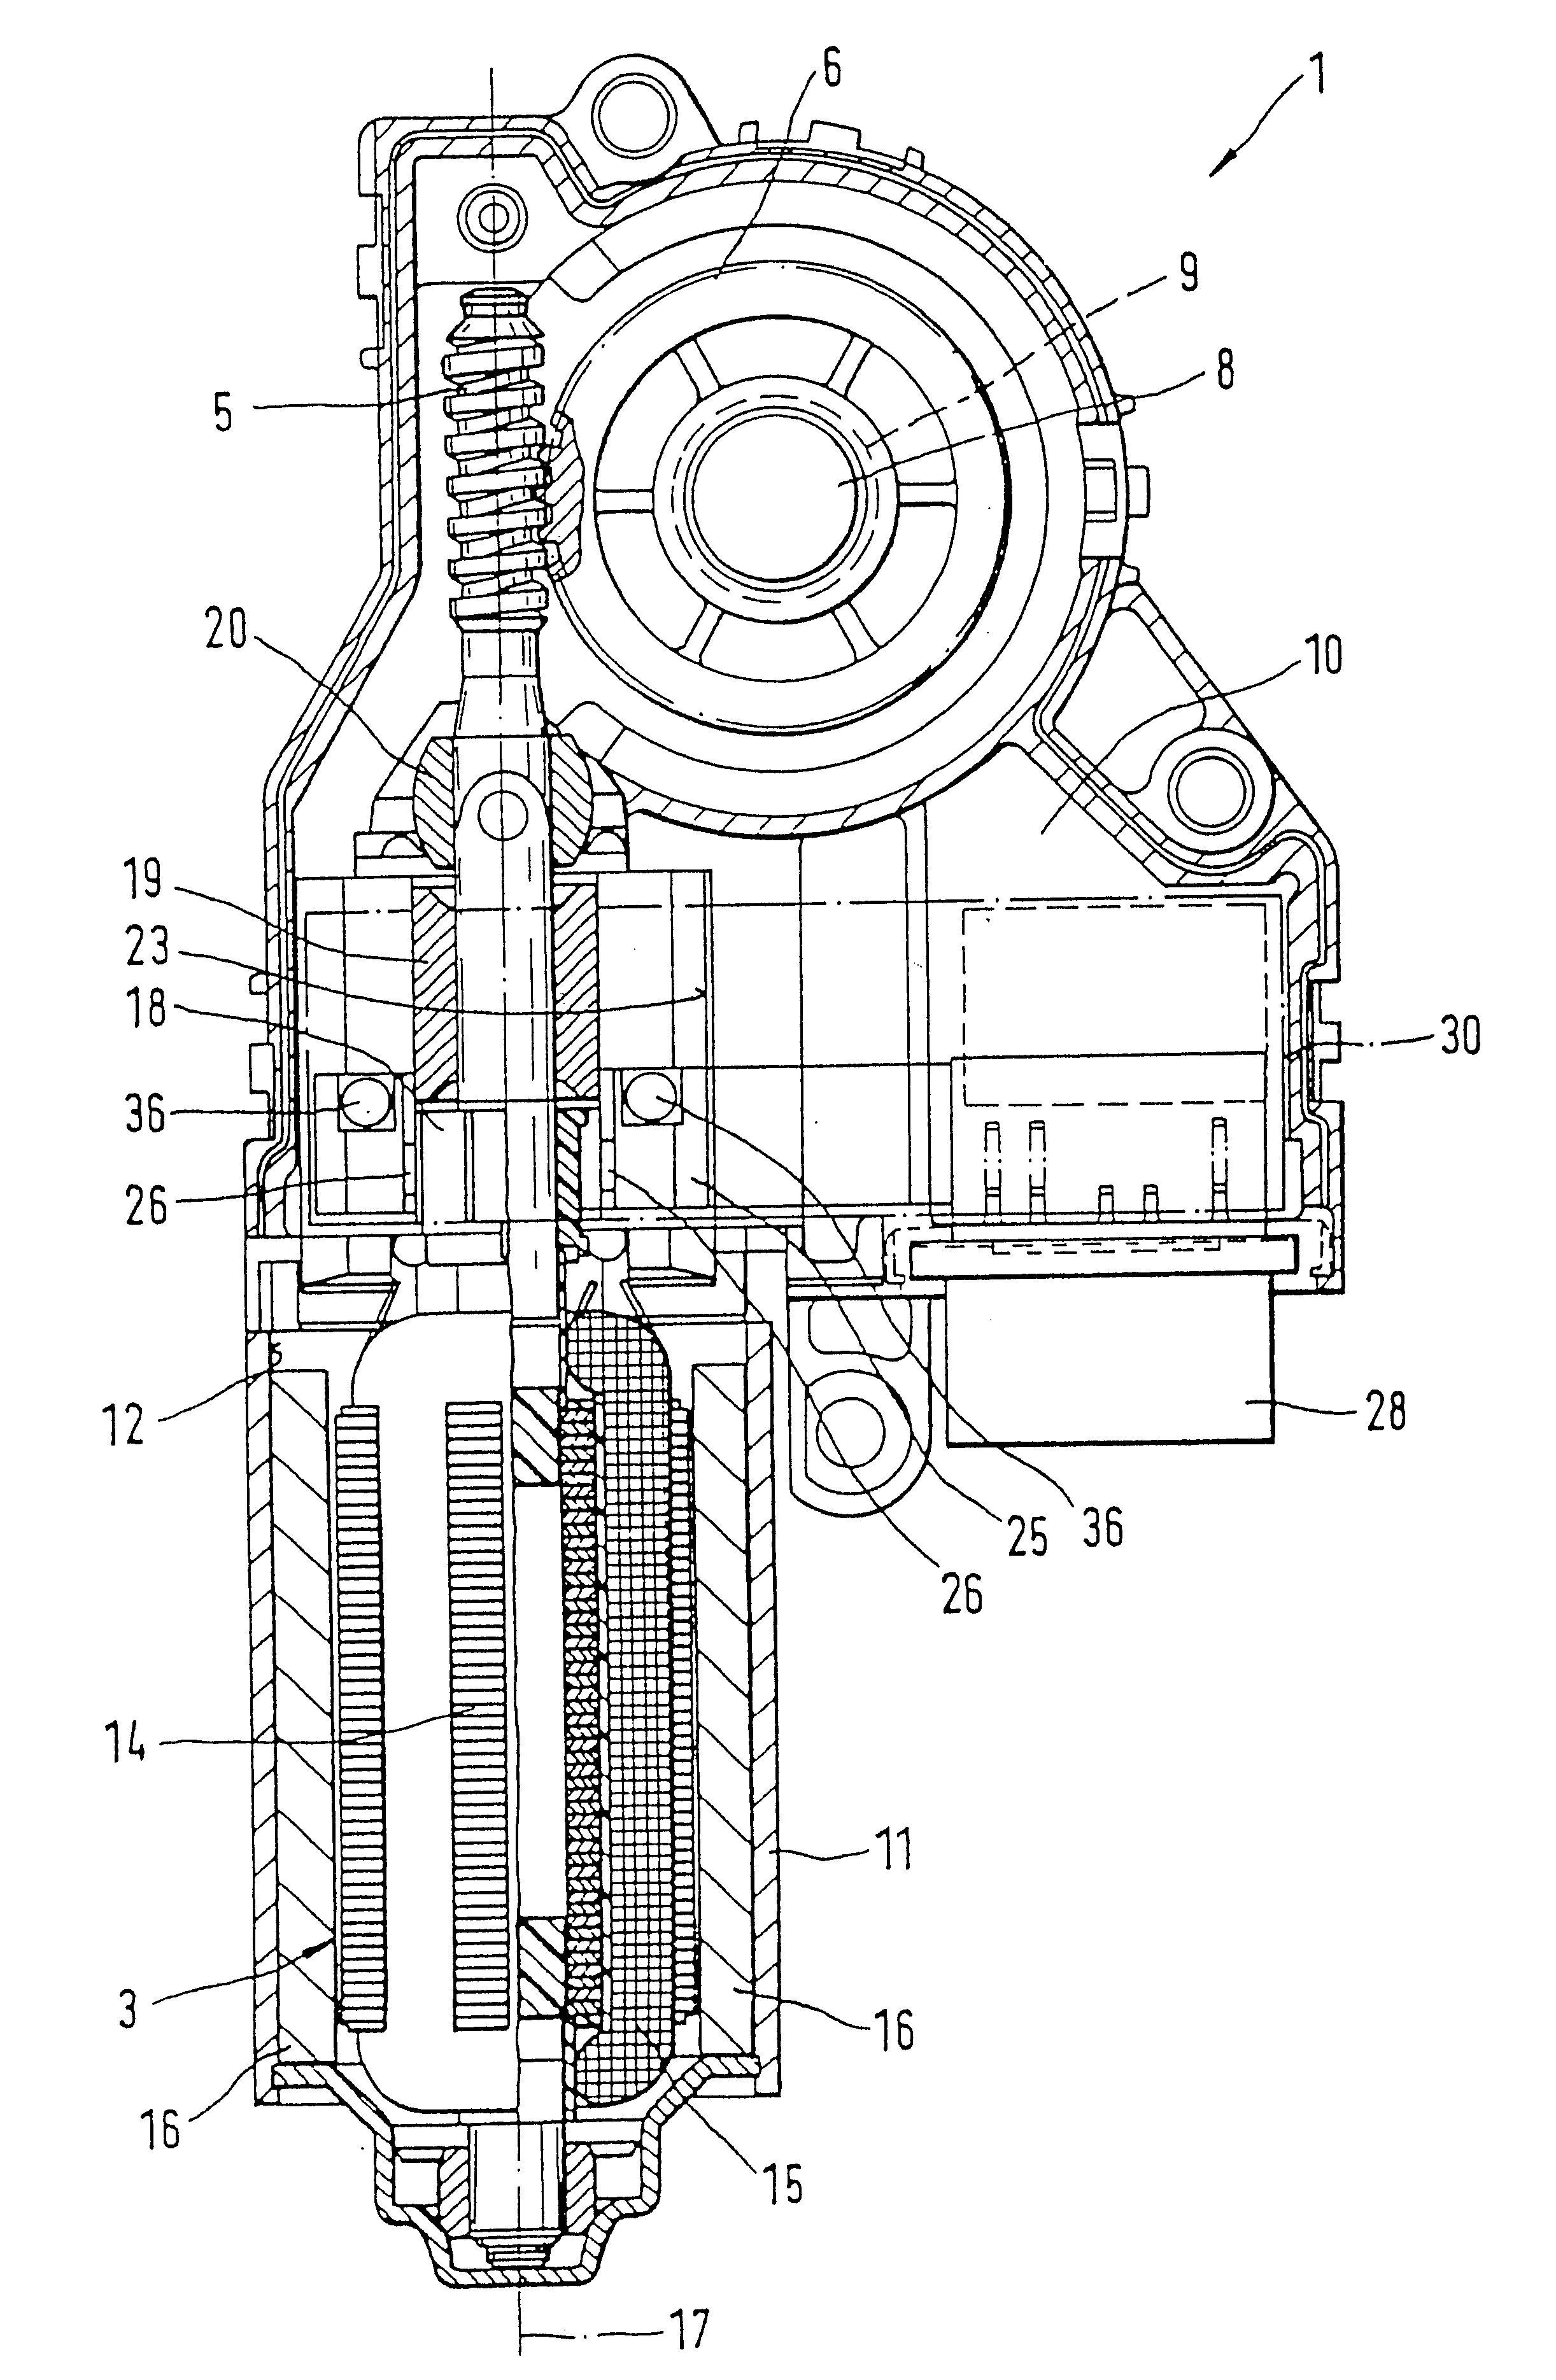 Drive device for moving a sliding sunroof of a vehicle